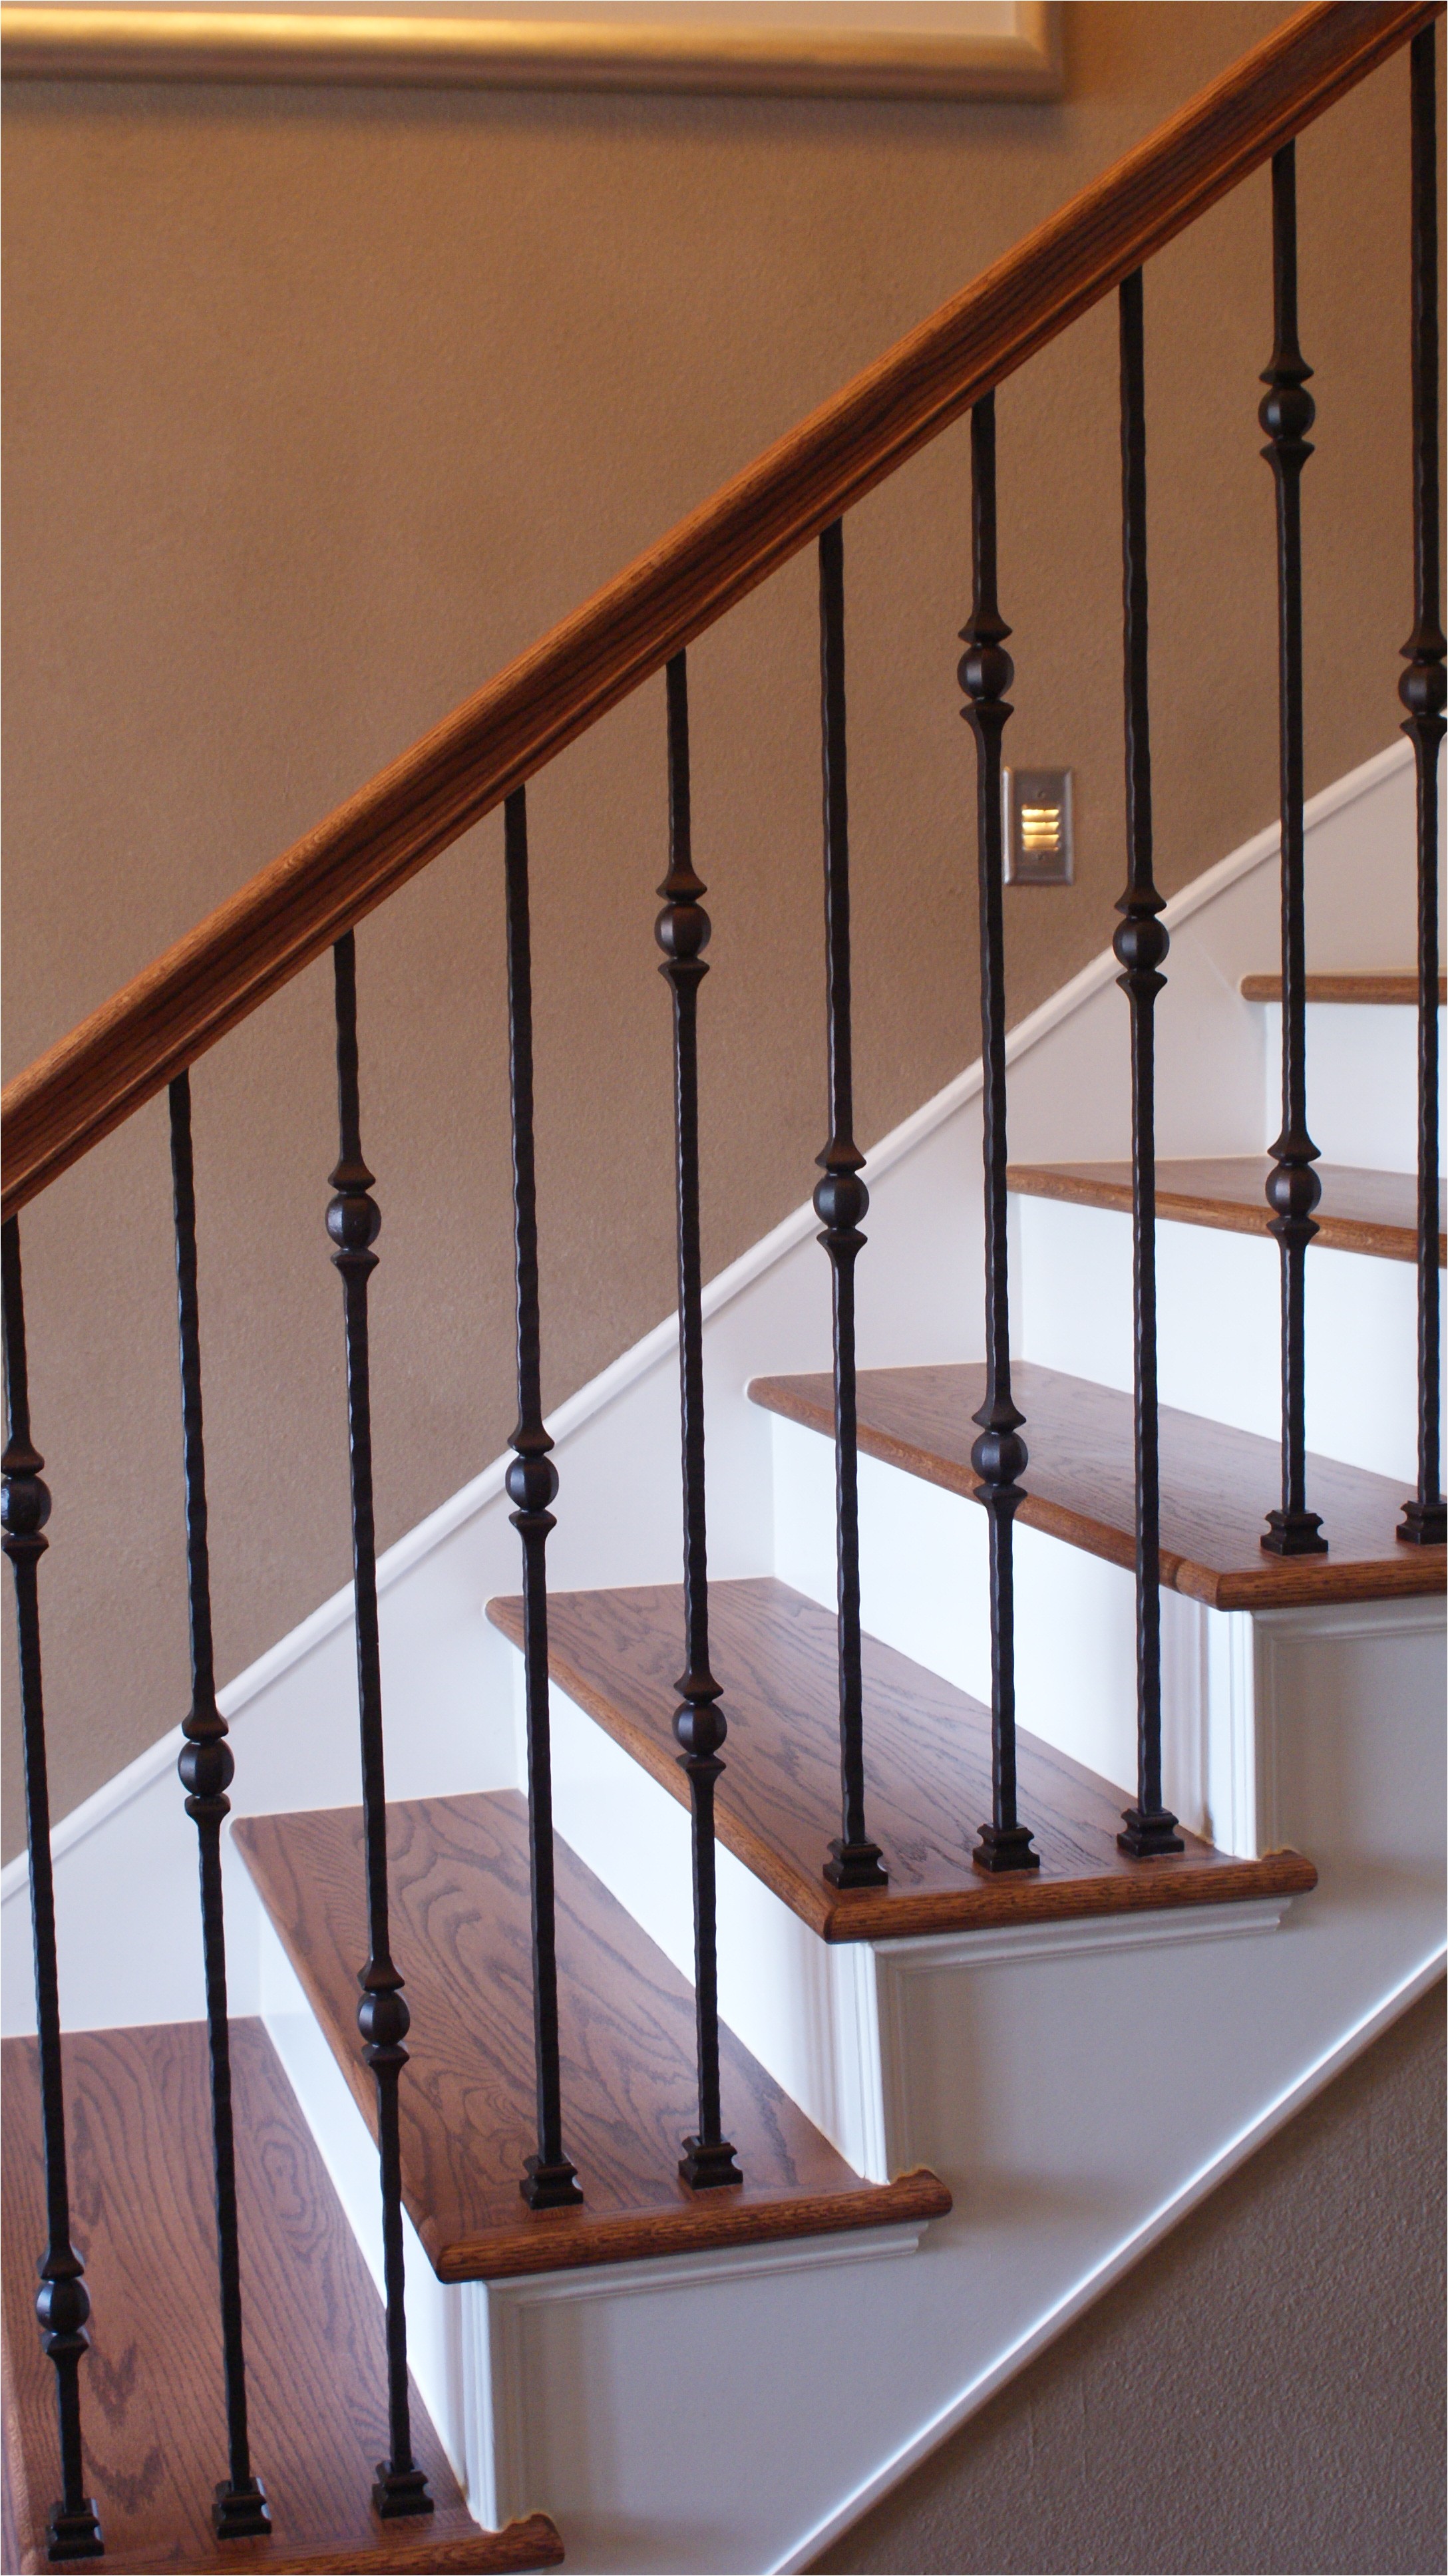 Indoor Stair Railing Kits Home Depot Exterior Wrought Iron Railings Home Depot Full Stair Of Indoor Stair Railing Kits Home Depot 